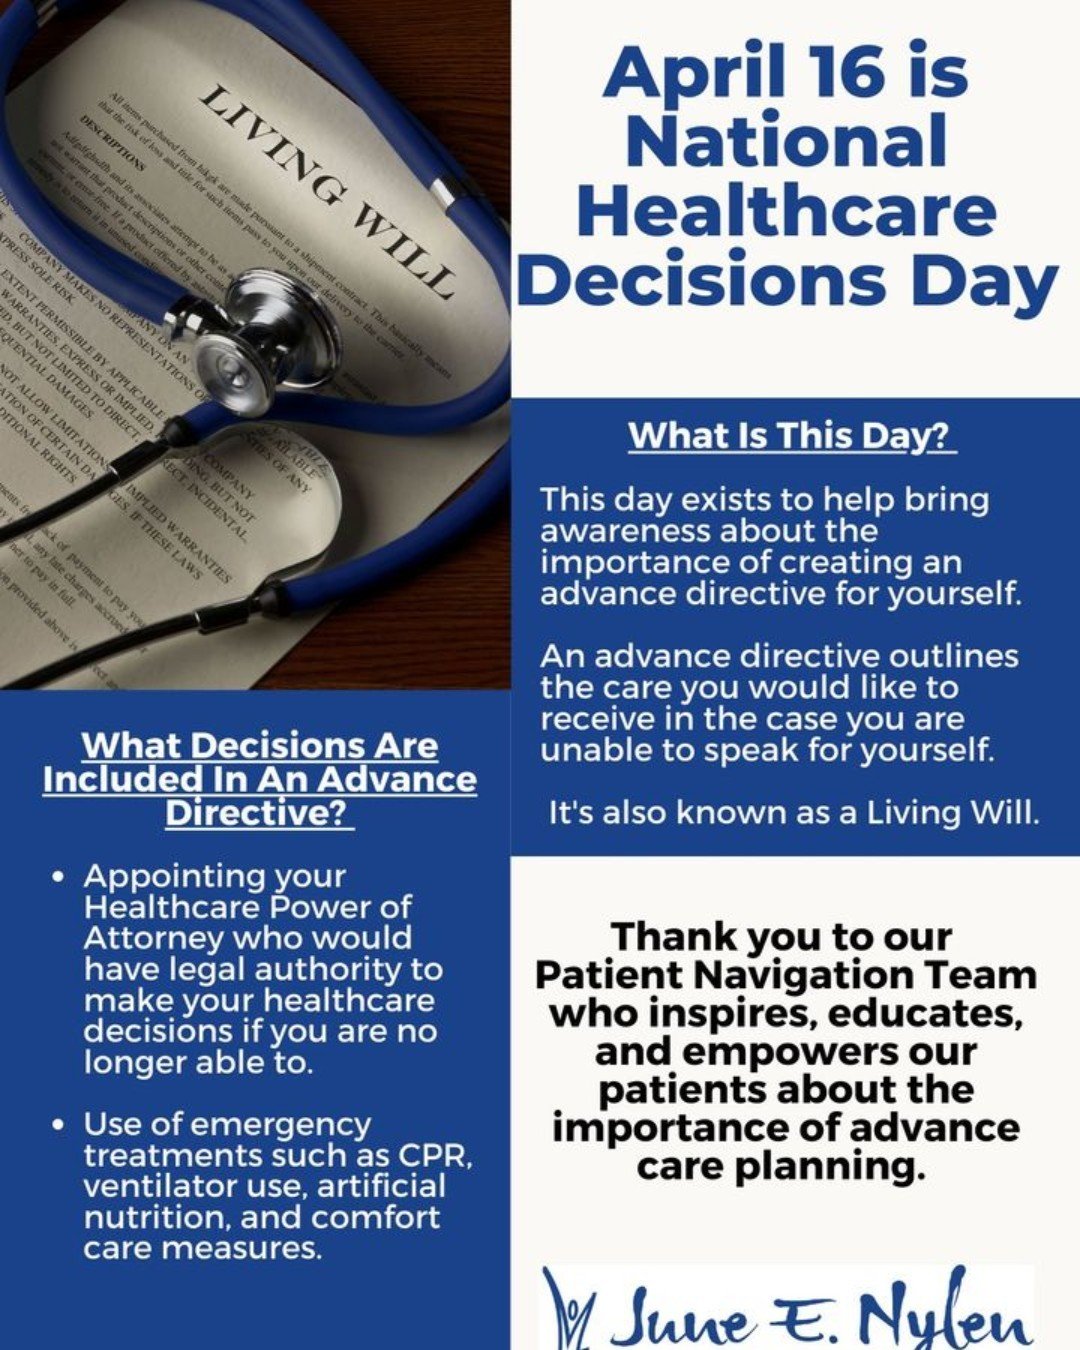 Today is National Healthcare Decisions Day. Be sure your healthcare providers and family members know your wishes.